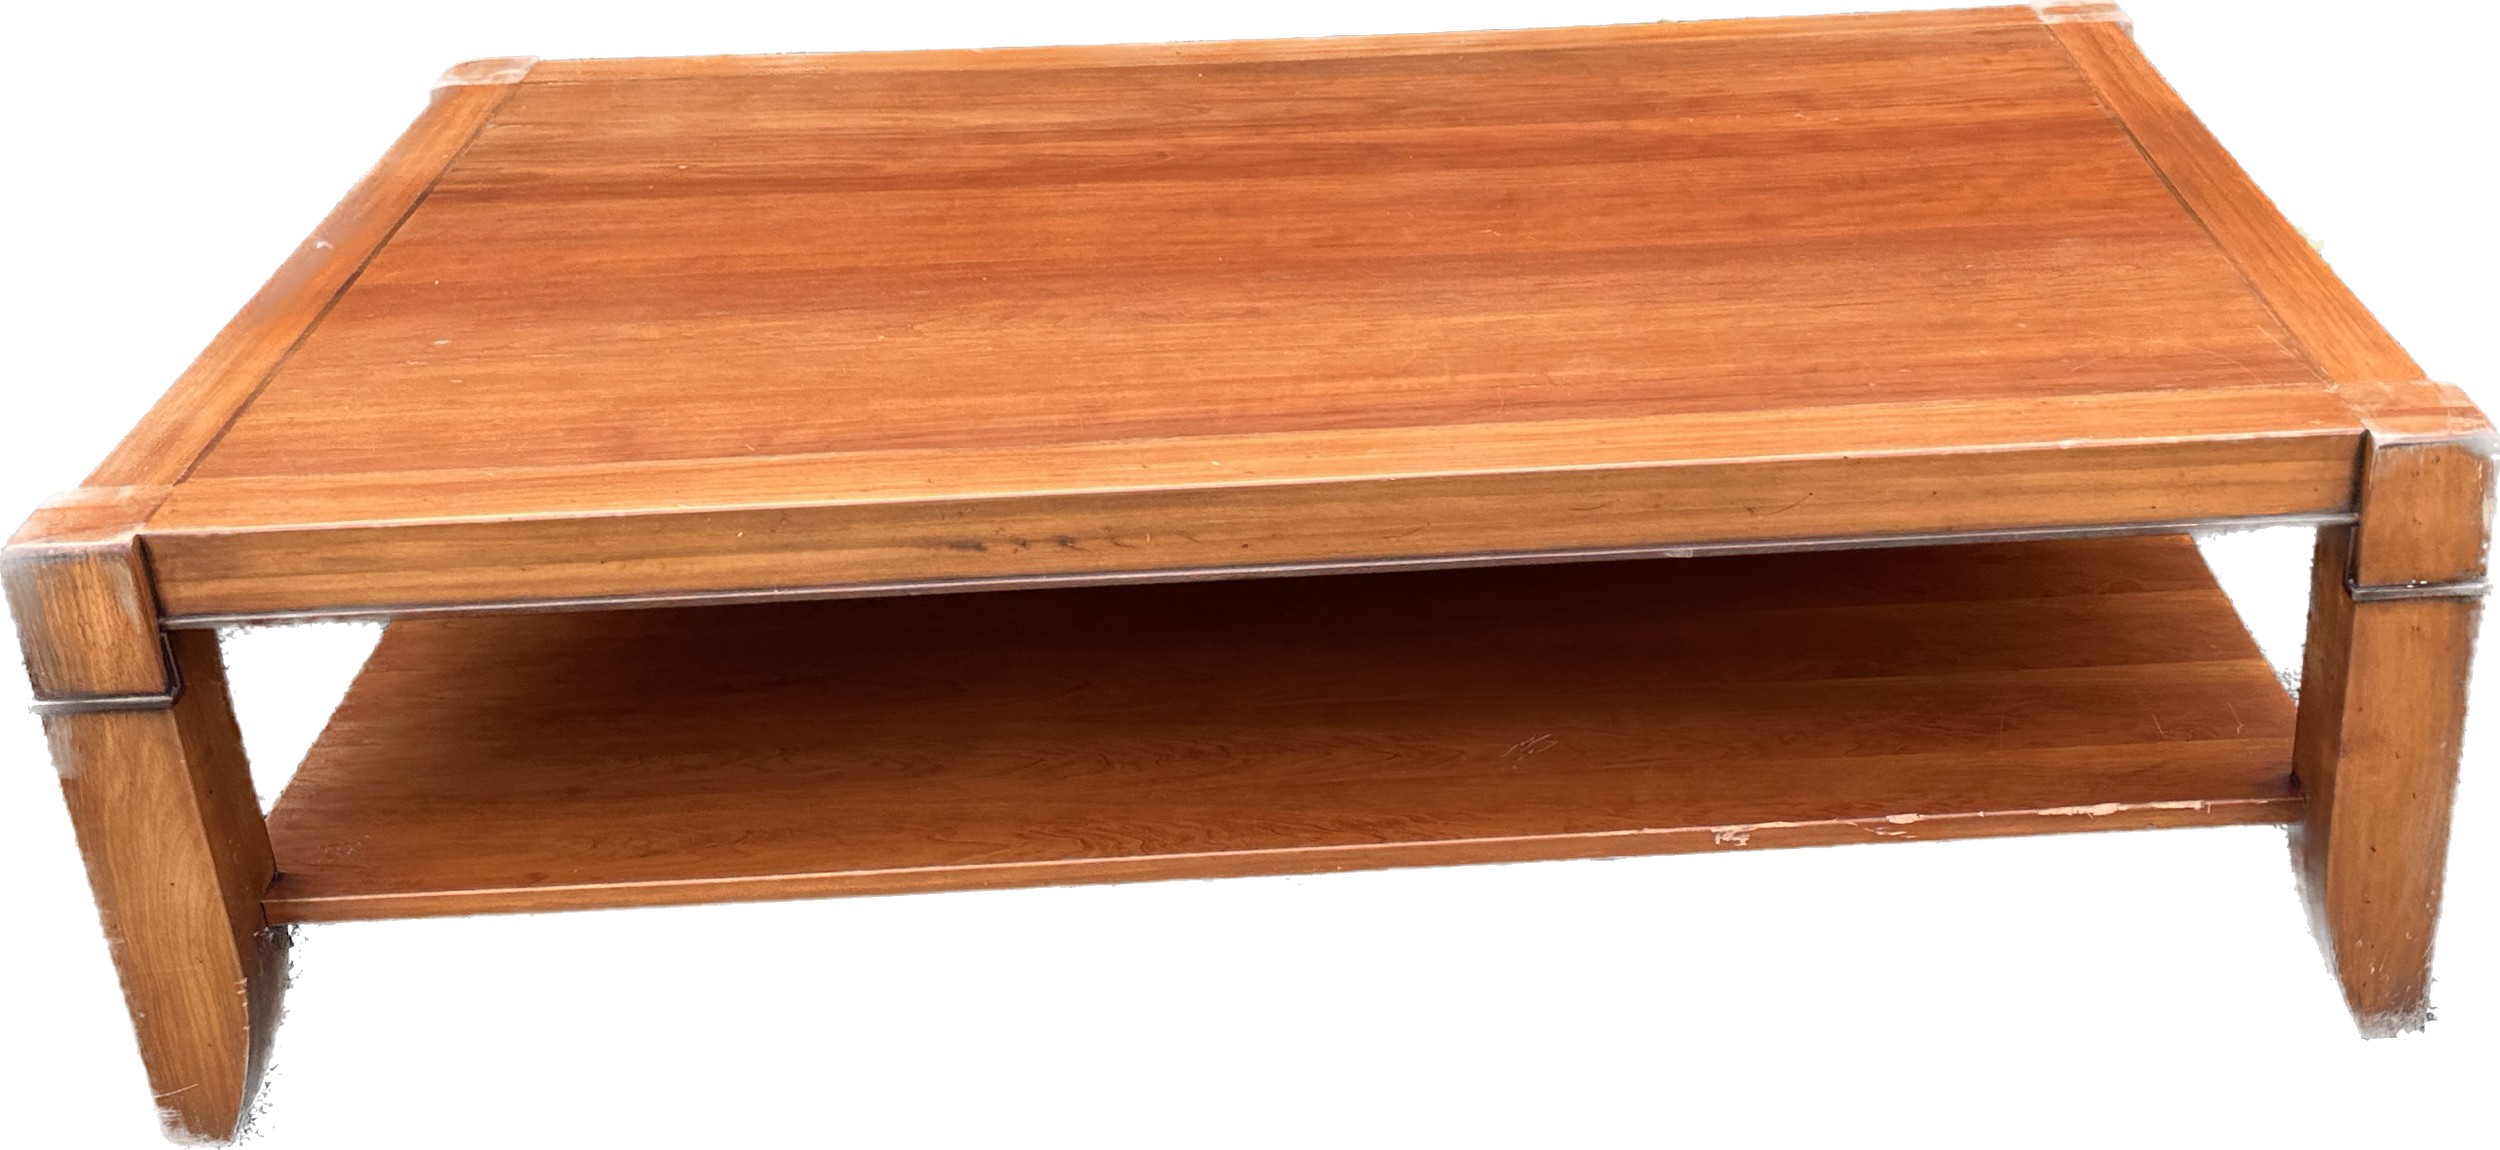 Large 1 shelf cherry wood coffee table measures approx 19 inches tall by 63 inches wide and 39.5